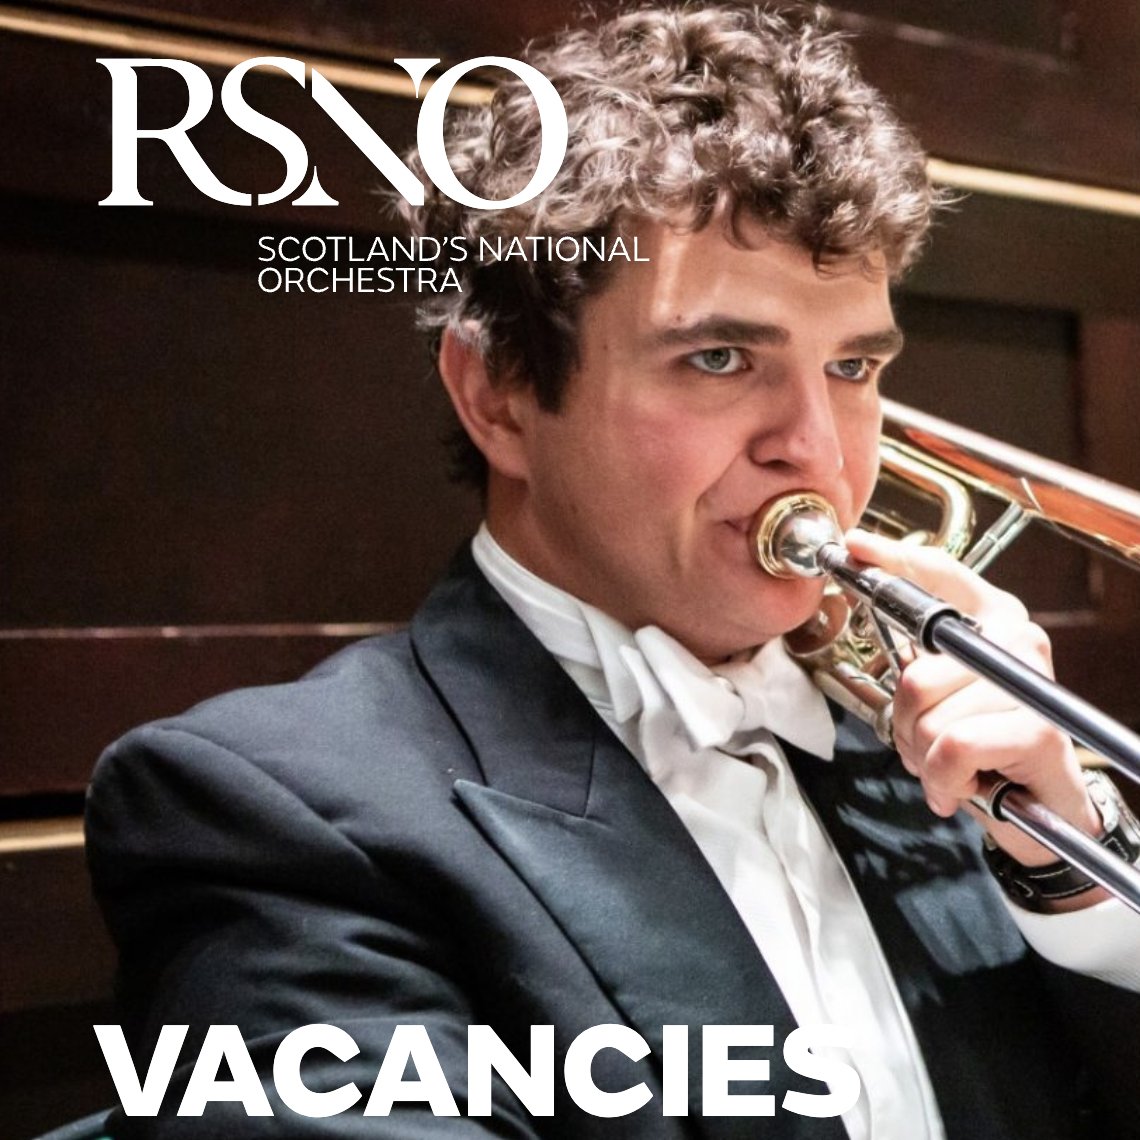 JOB @RSNO hiring an Orchestra Technician salary £30,000 - £32,000 per annum APPLY by 5pm on 10 June at ➡ scottishmusiccentre.com/jobs/rsno-orch…